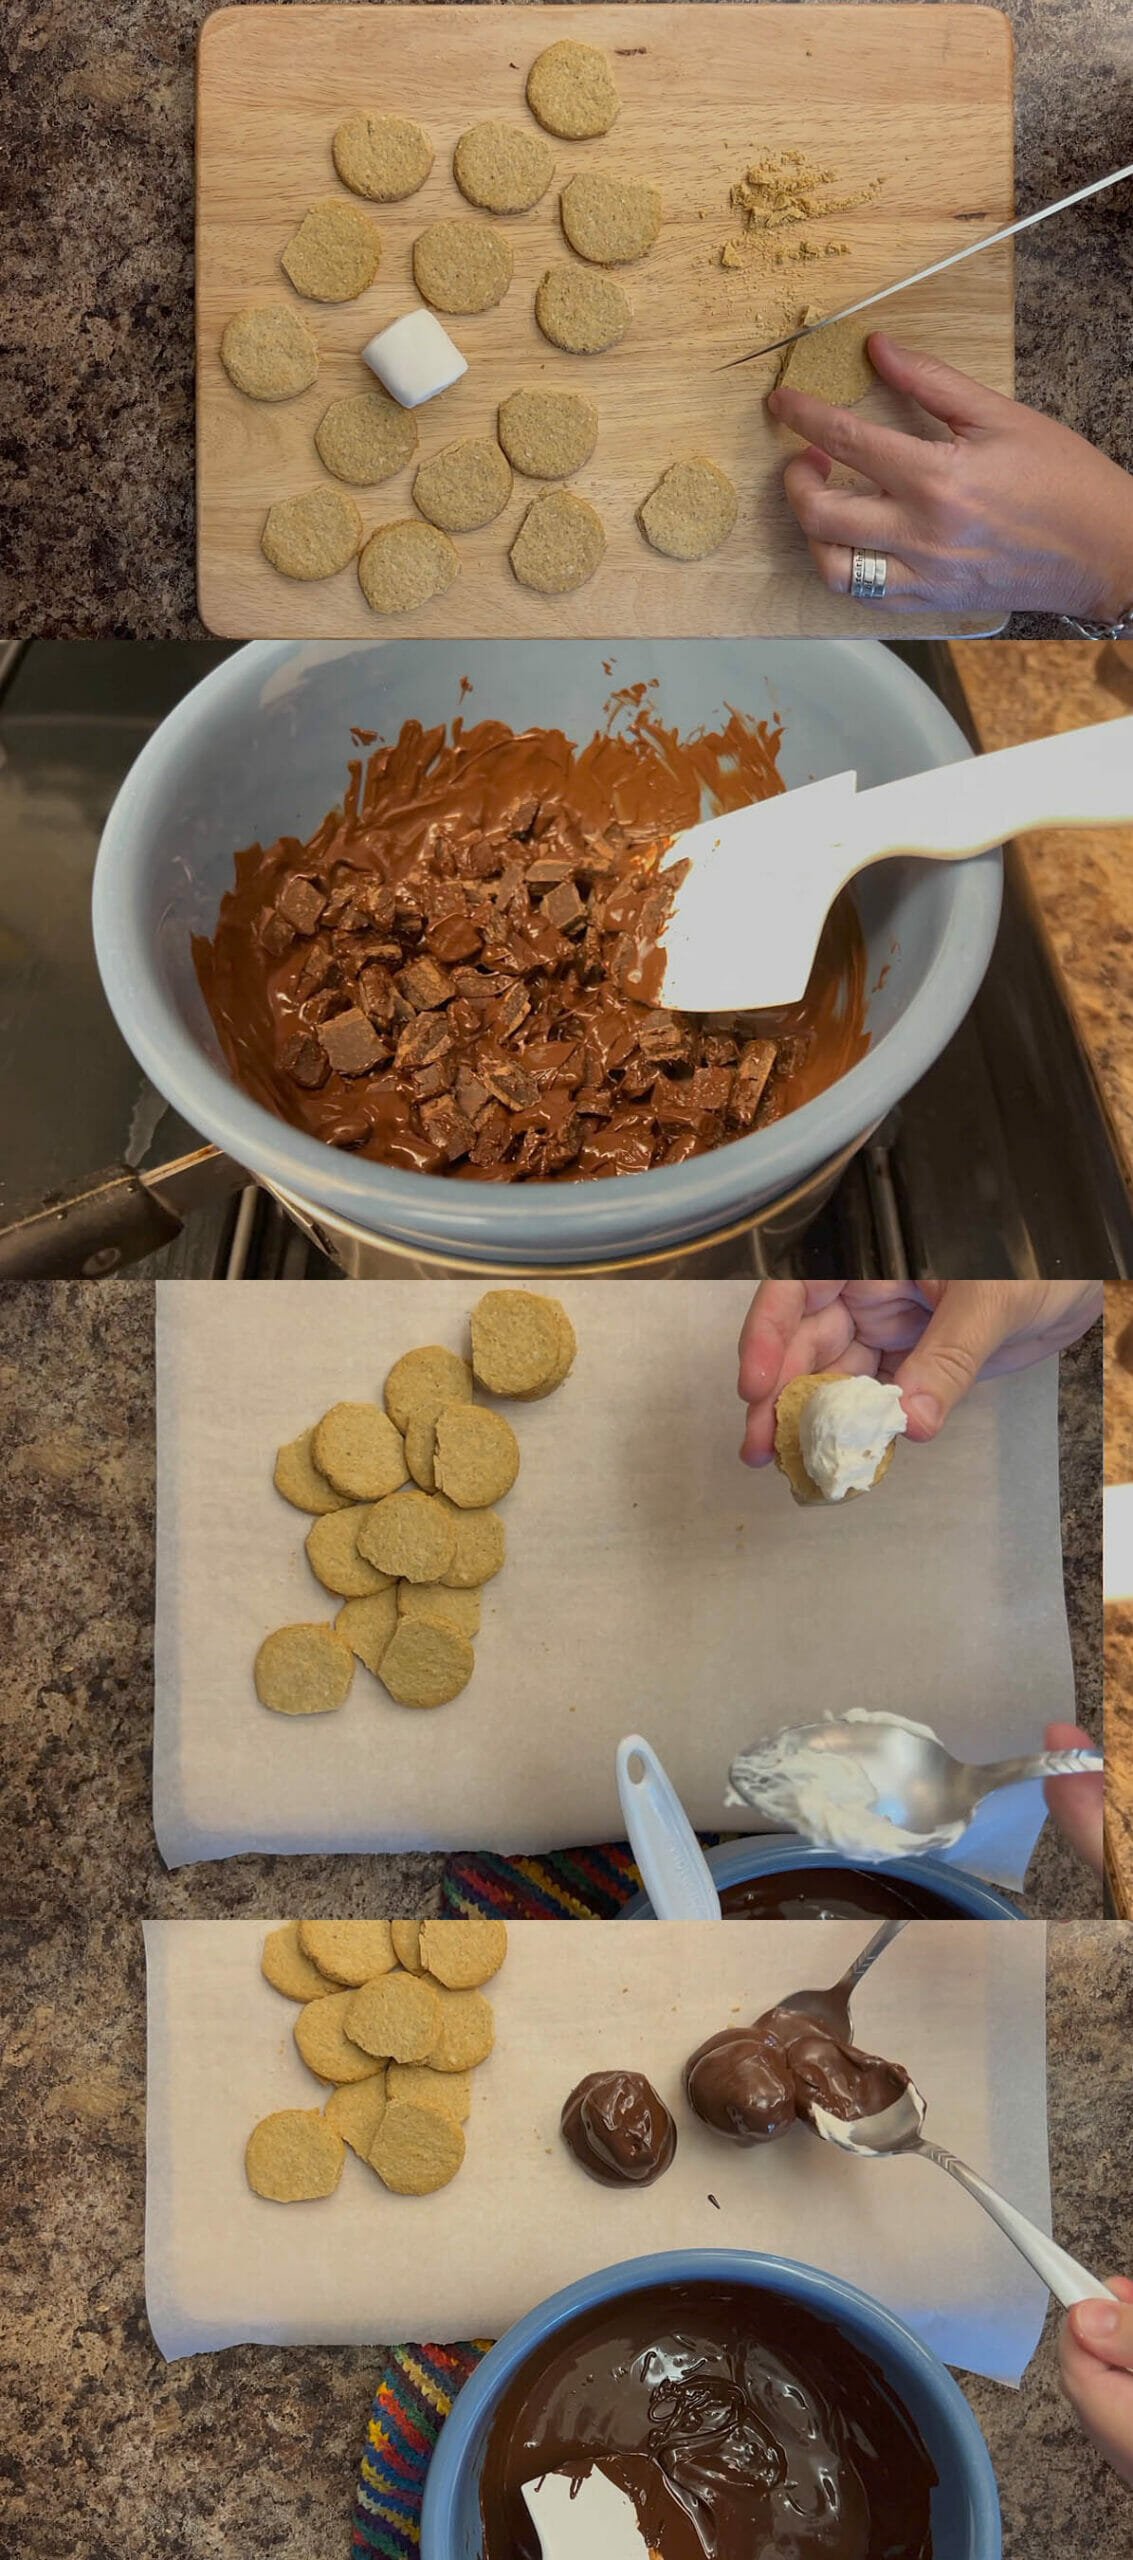 Stages of the marshmallow cookies being made.